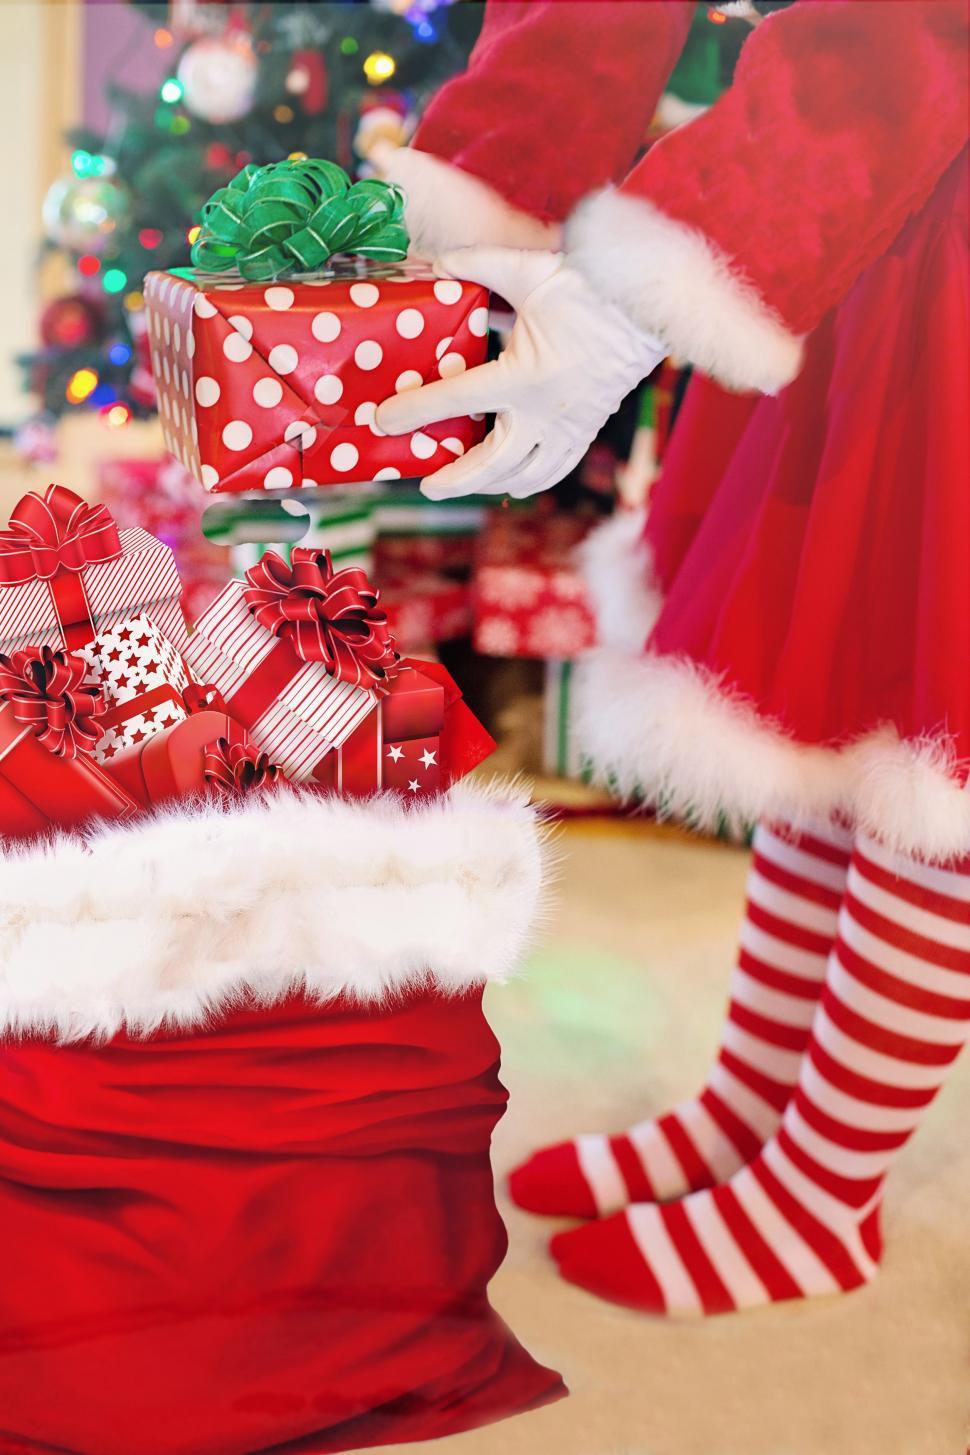 Free Image of Santa Woman in Red White Striped Socks With Gifts 